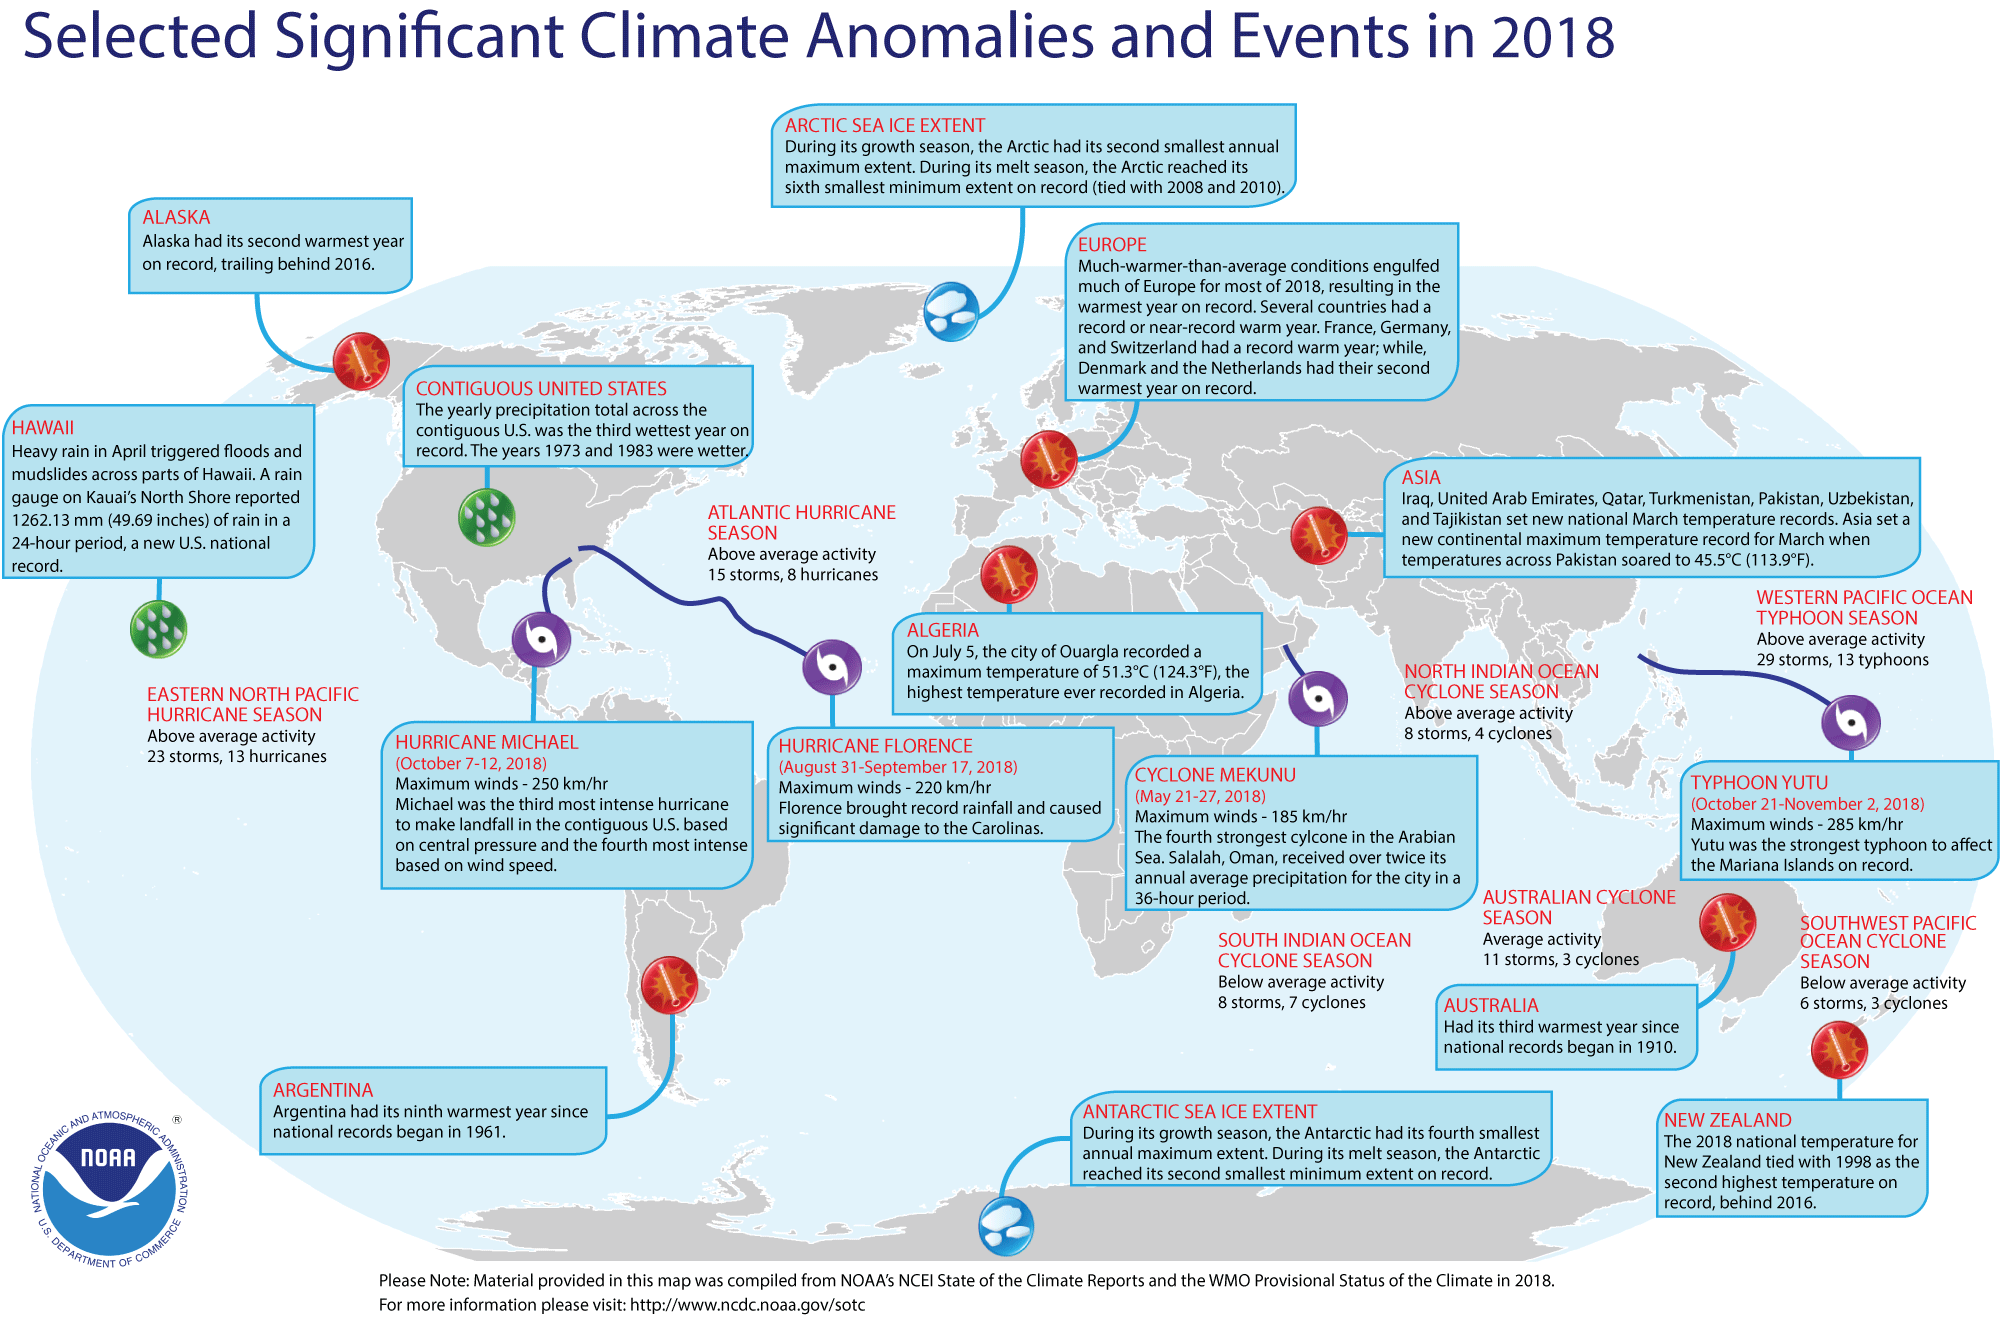 Significant Climate Anomalies and Events in 2018